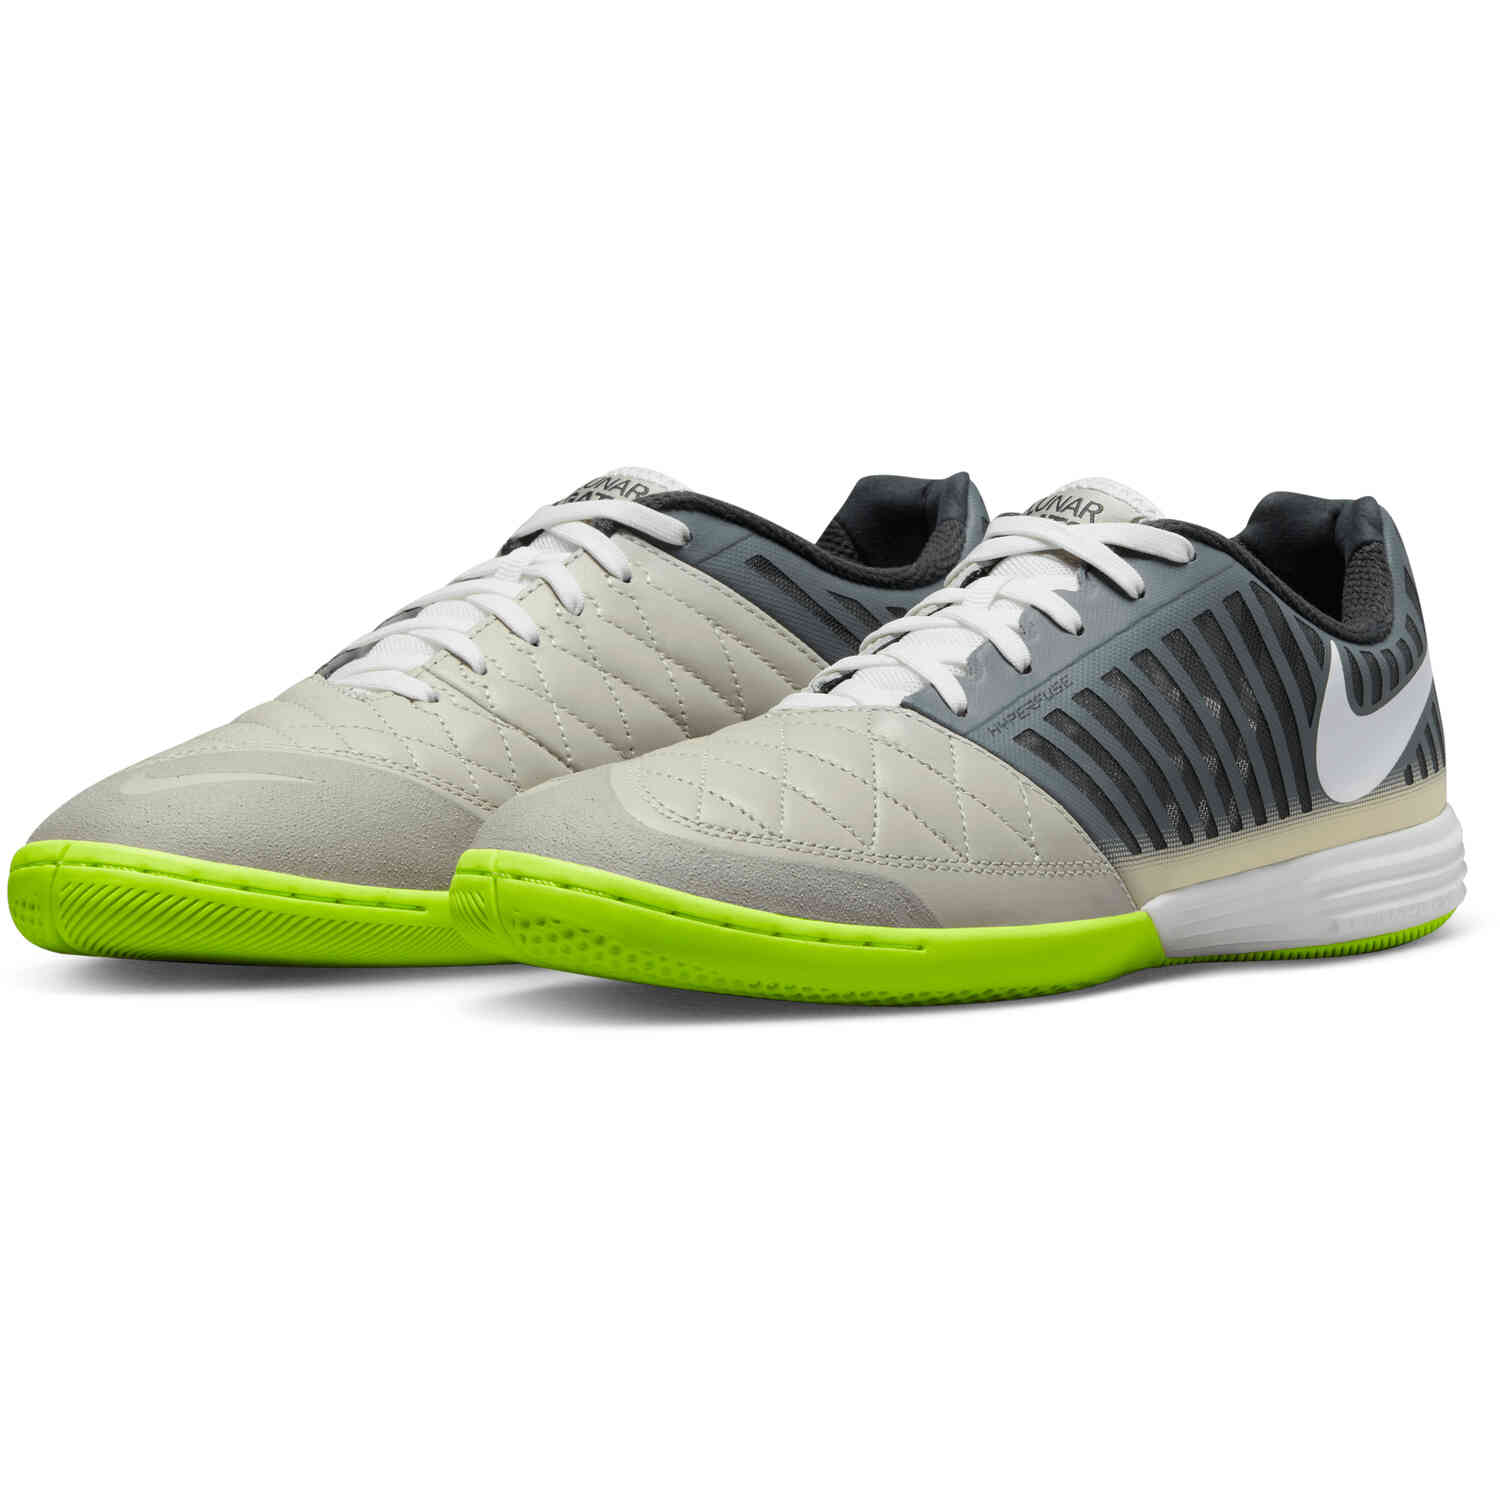 Nike Lunar Gato II IC Indoor/Court Soccer Shoes - Smoke Grey, White,  Anthracite & Pale Grey - Soccer Master